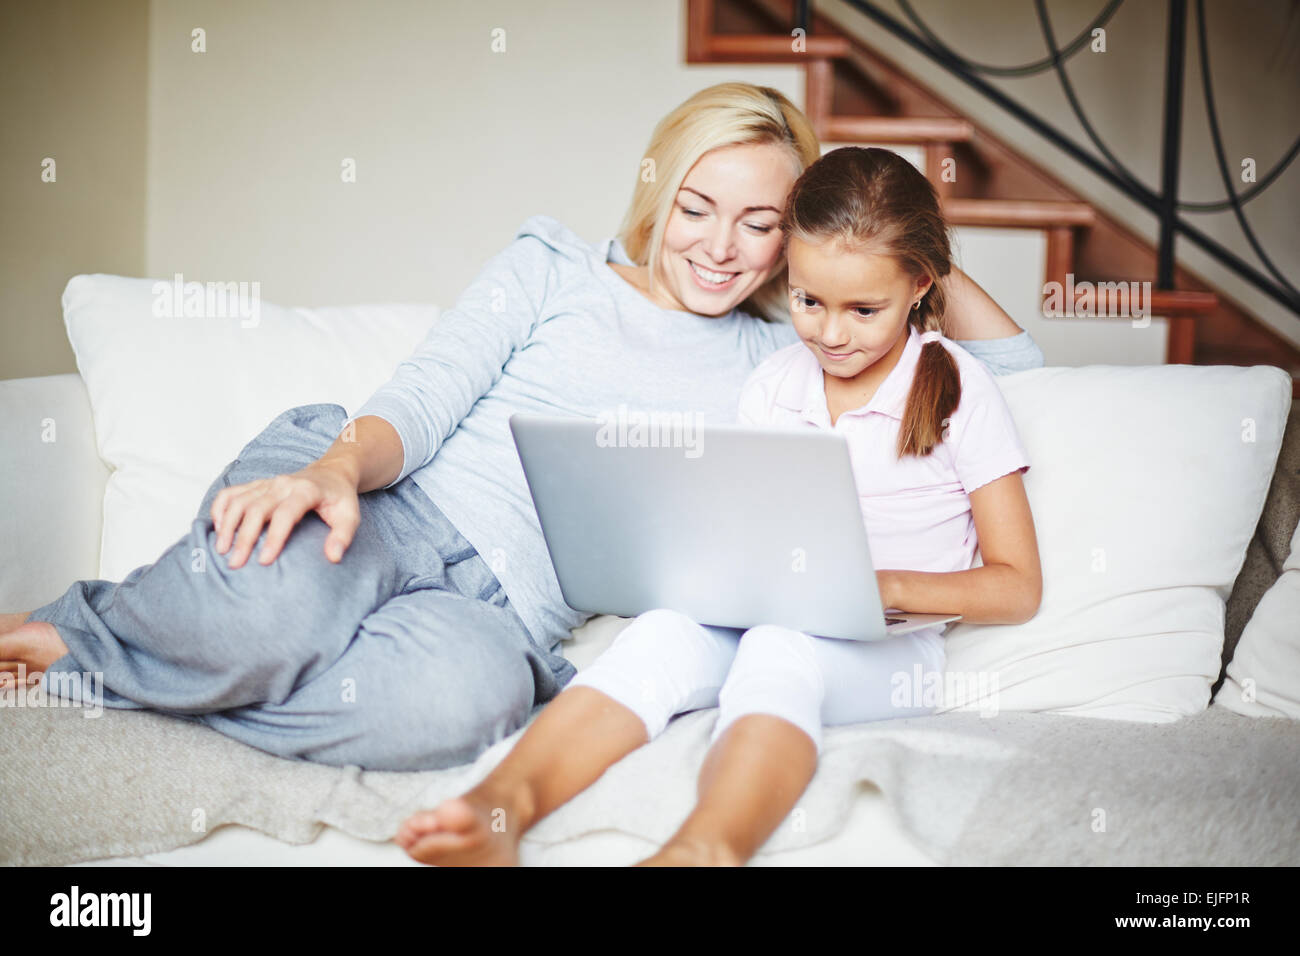 Smiling mother and daughter using laptop at home Stock Photo